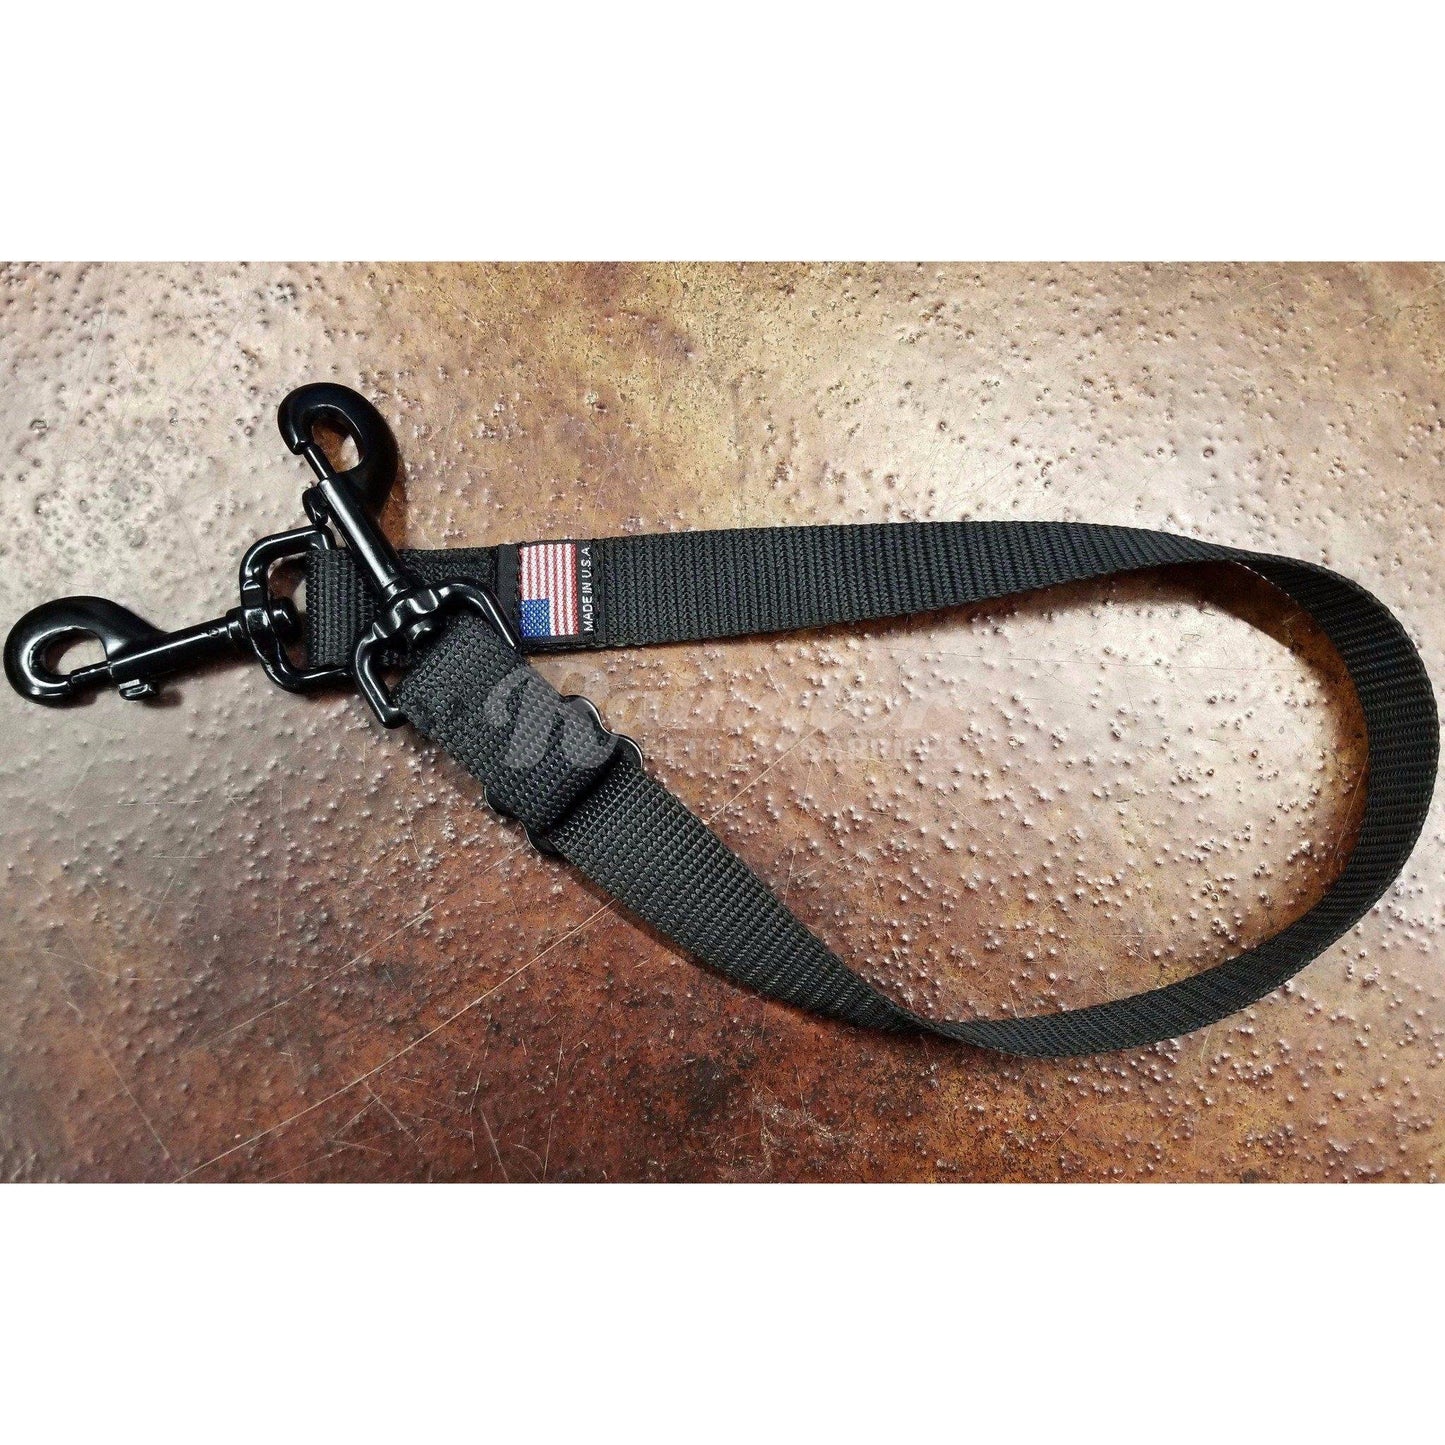 MIL-SPEC Heavy Duty Snap Strap - Cargo Hold Leash or Extension Clip On for Dogs-Raingler